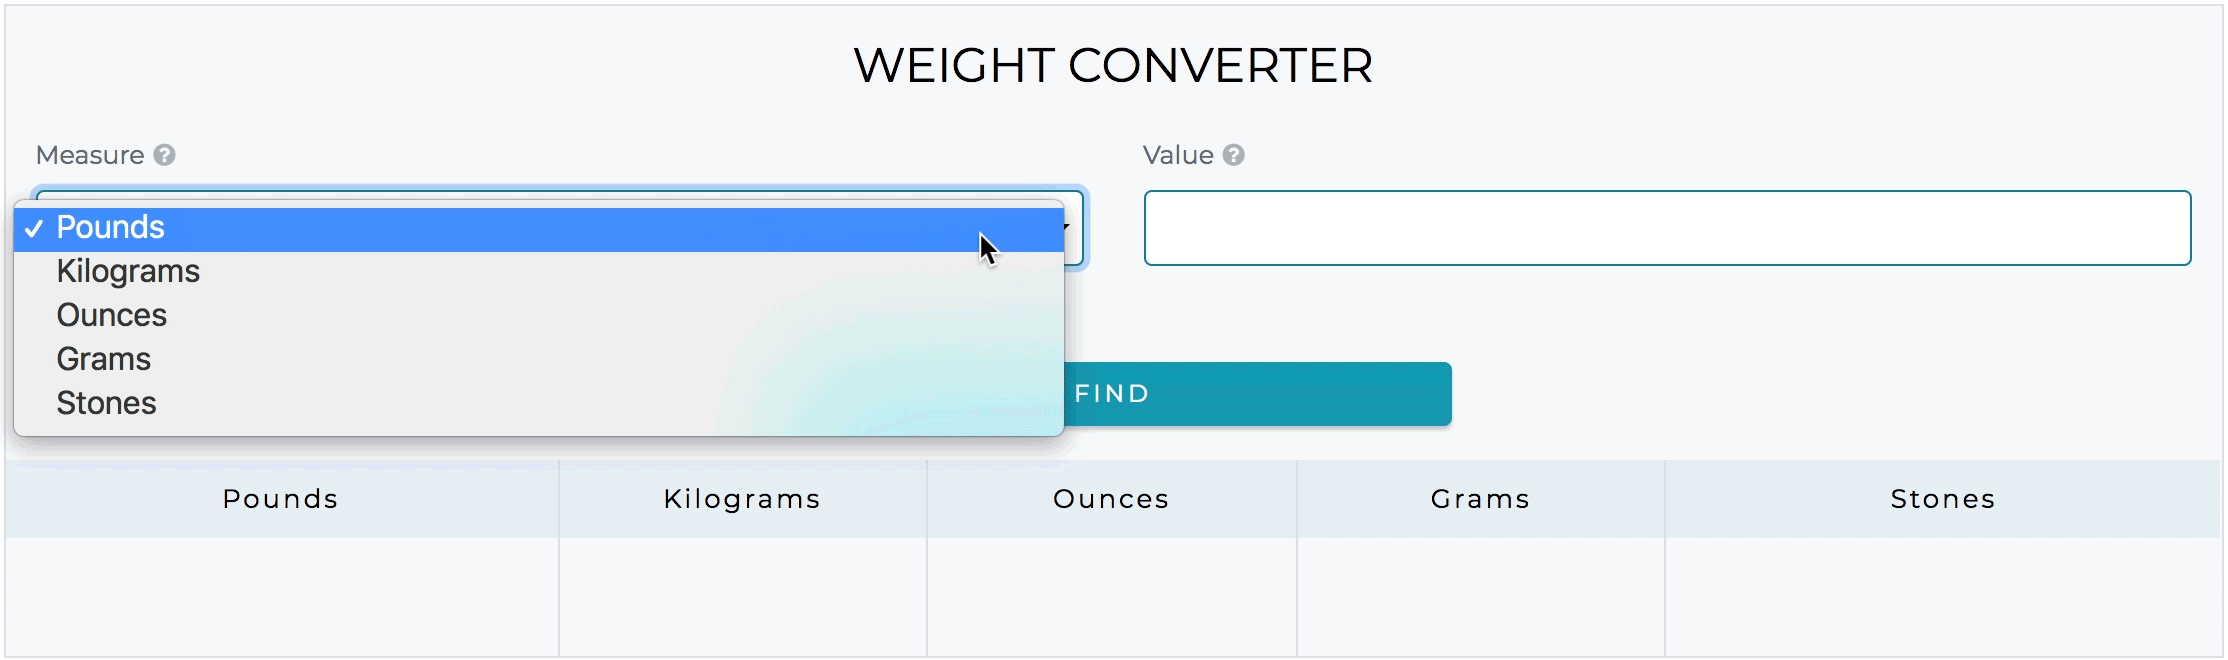 How to use weight converter